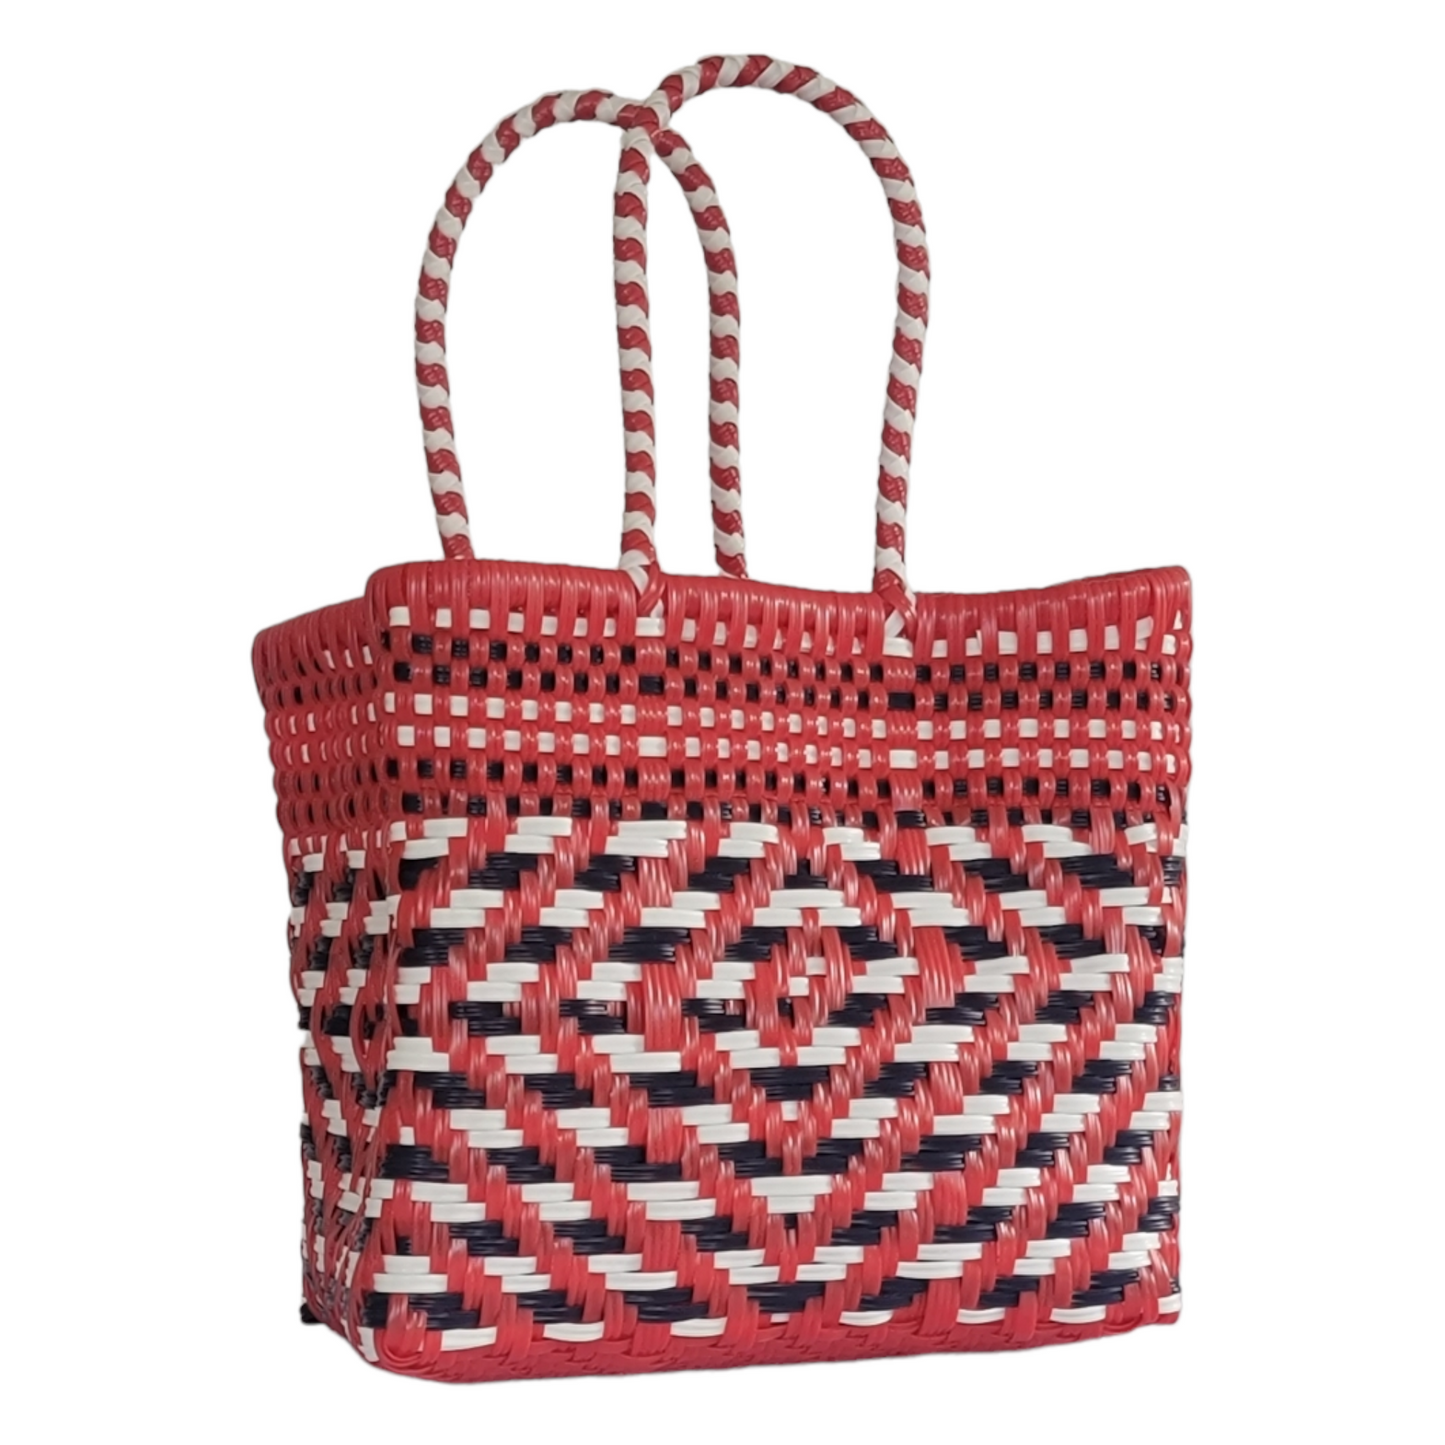 Red with Black & White Details Mini Tote | Handwoven recycled bags